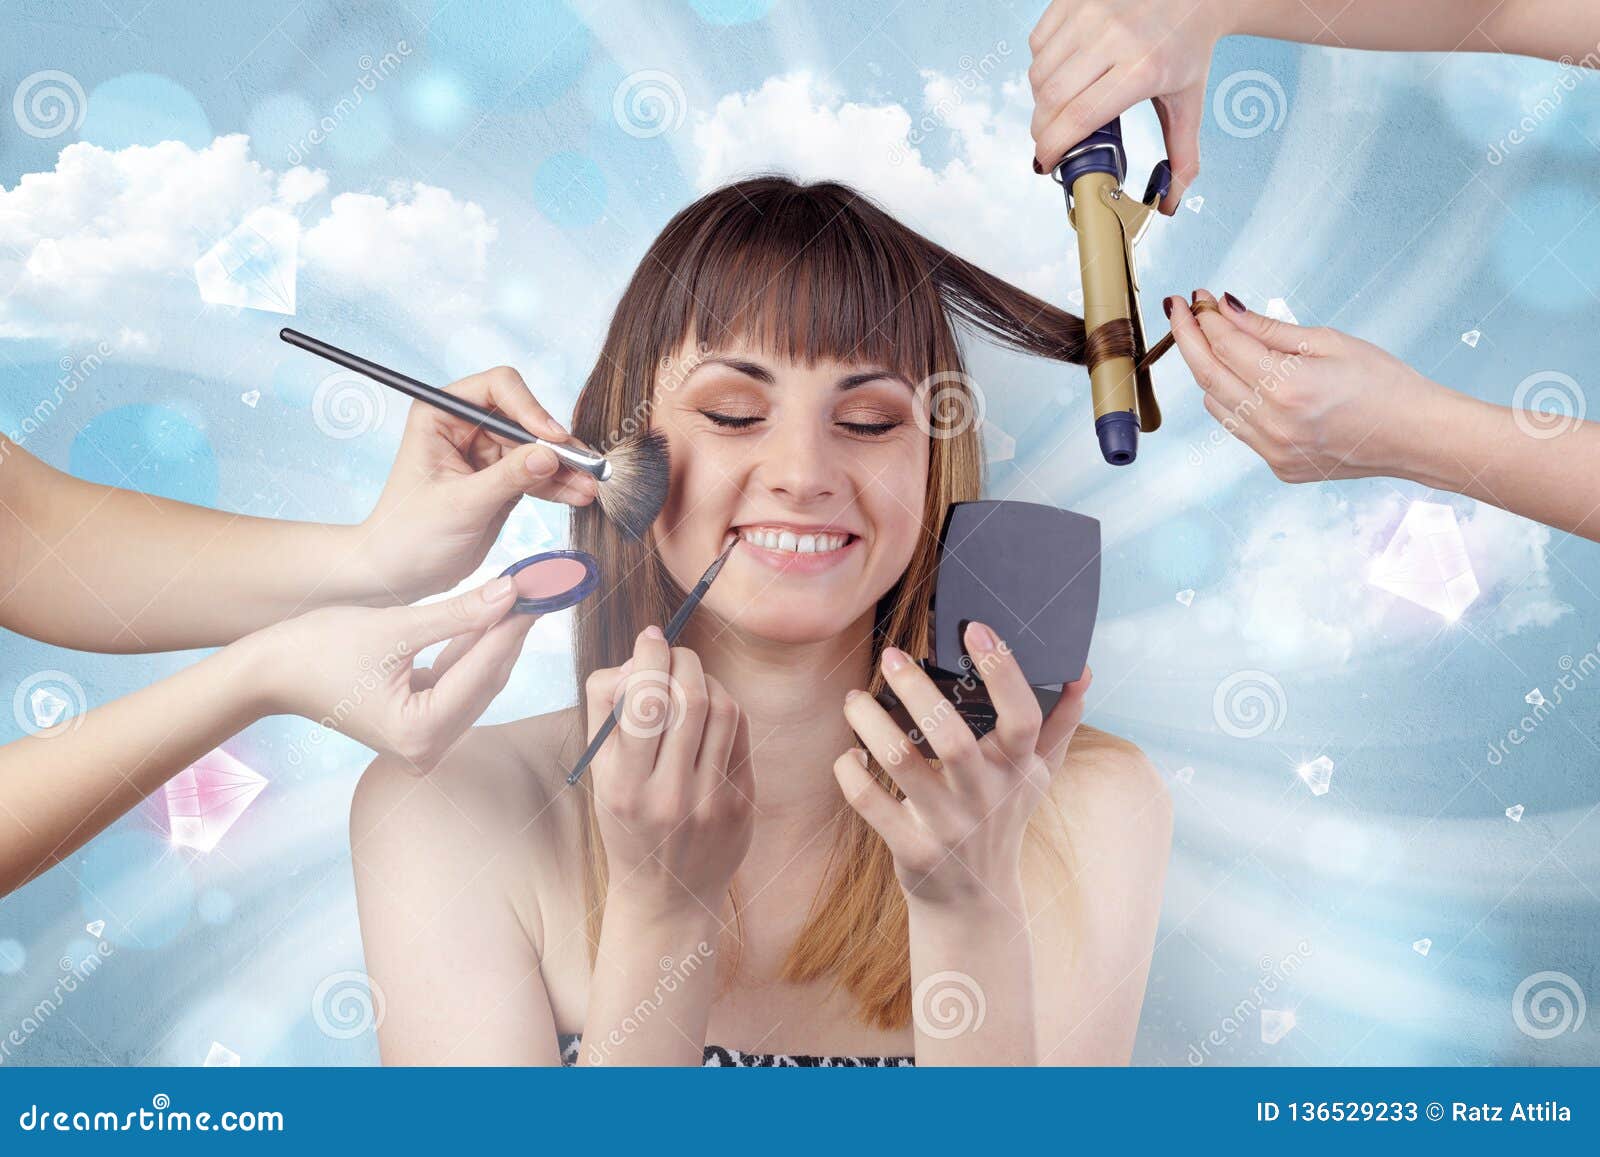 Pretty Girl Portrait in Beauty Salon Stock Image - Image of hairstyle,  girl: 136529233